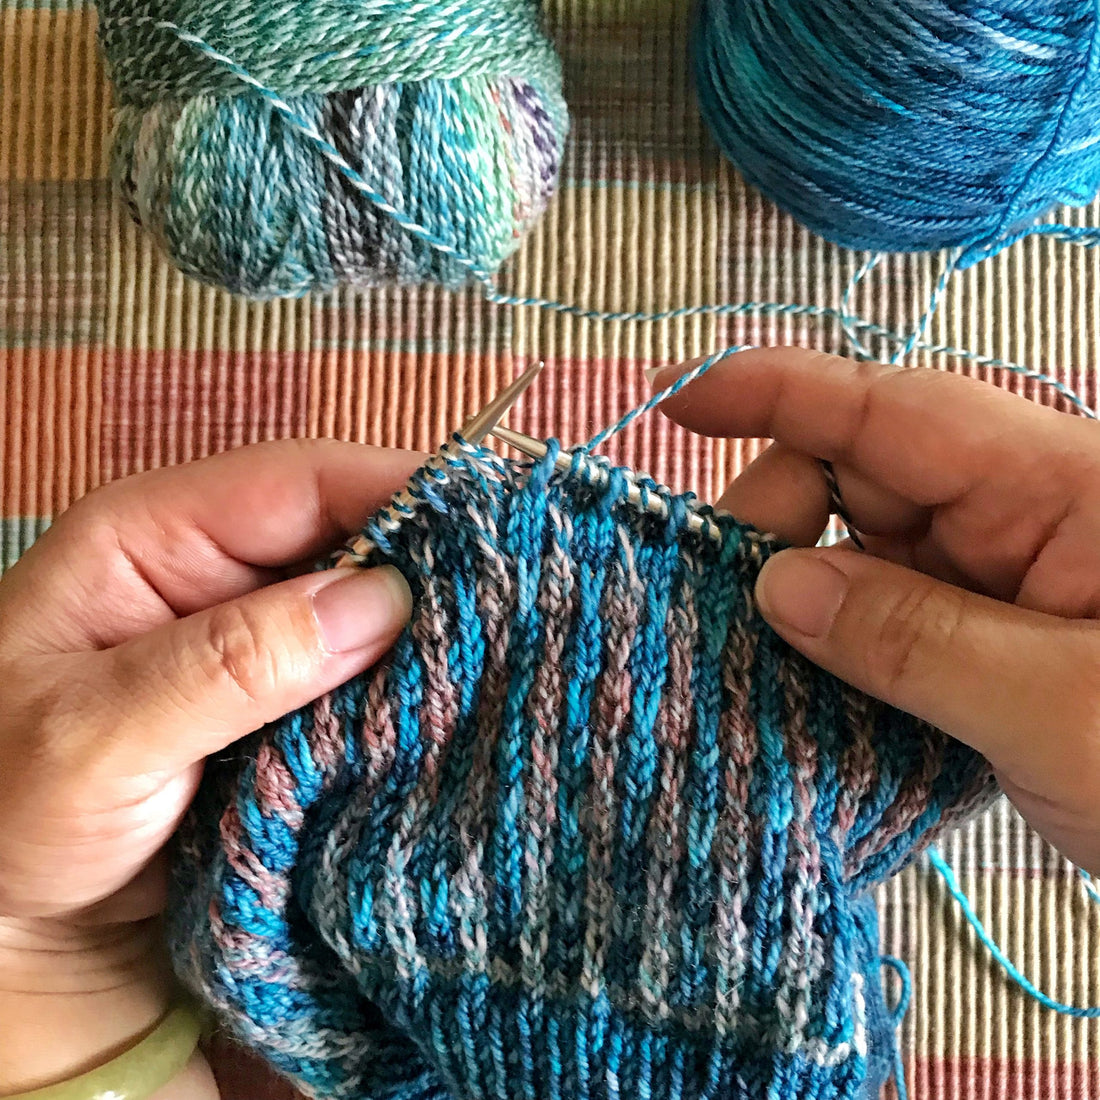 What is Knit Weaving?